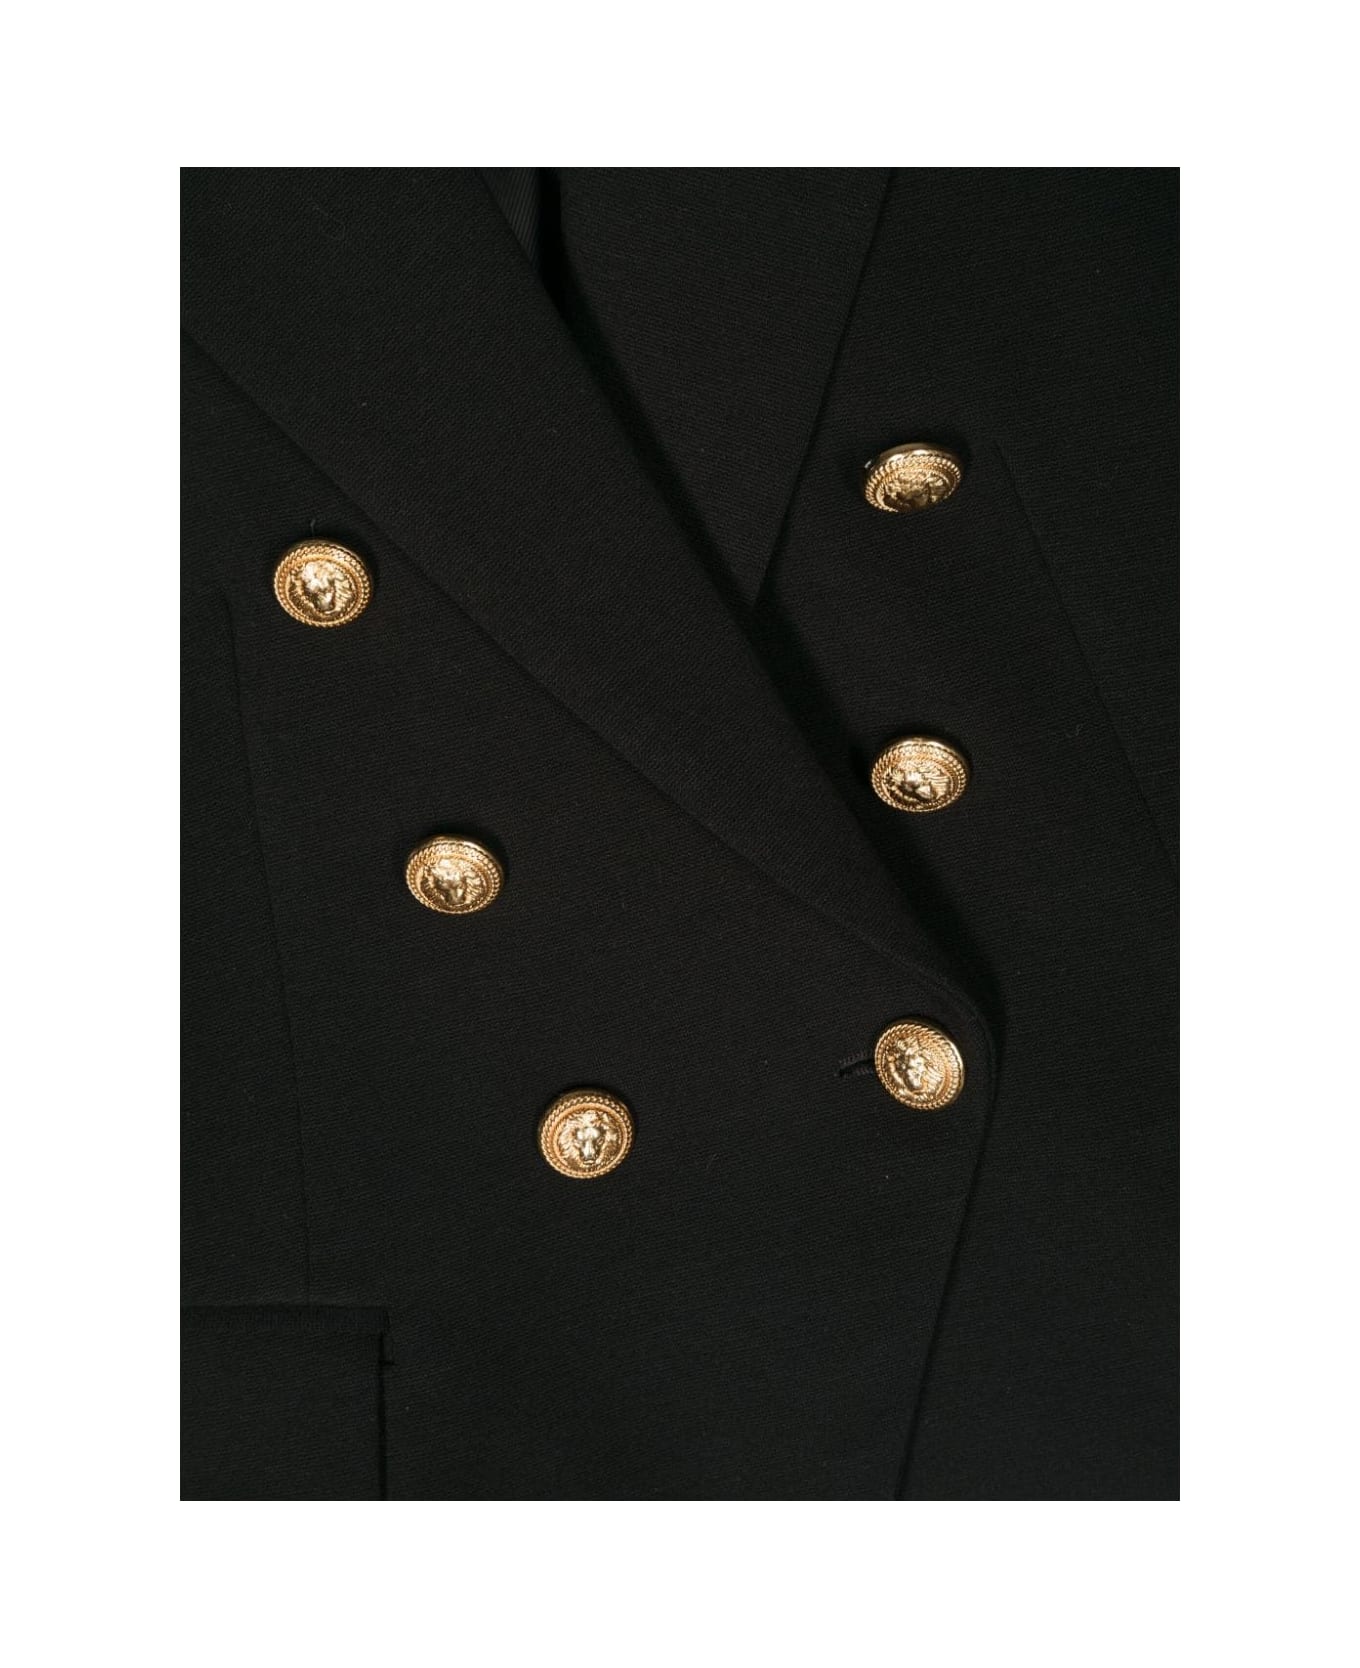 Balmain Black Double-breasted Blazer With Gold Buttons - Black コート＆ジャケット